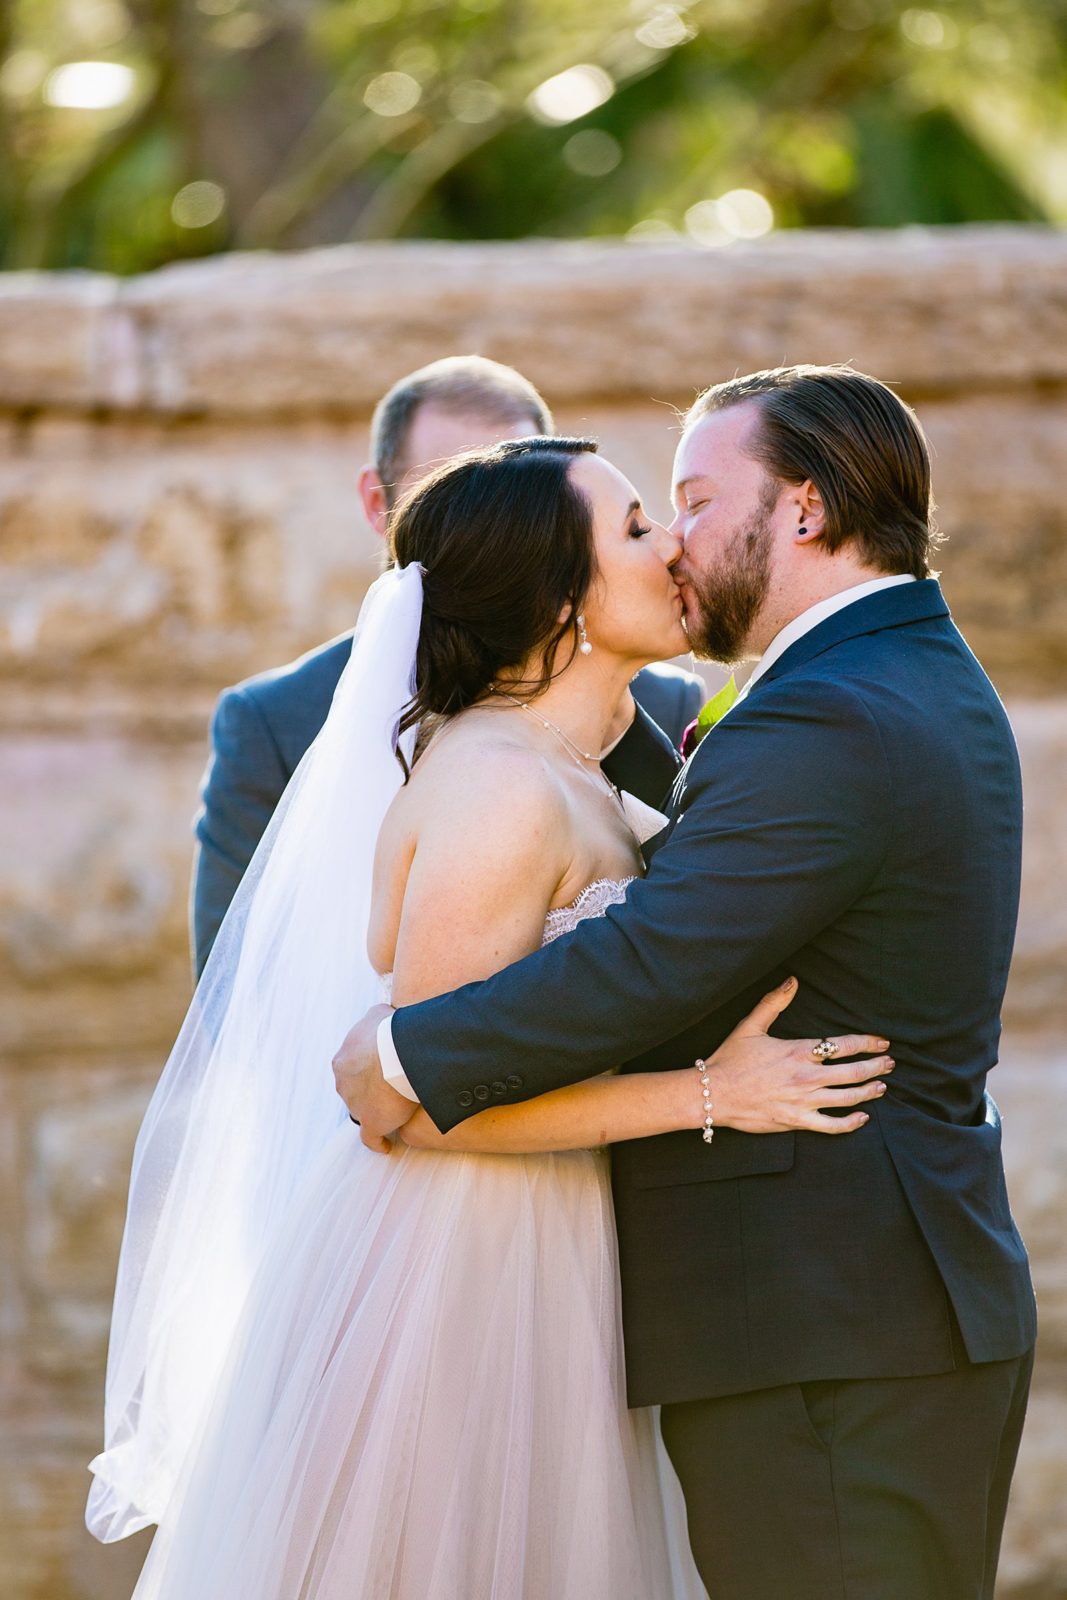 Bride and Groom share their first kiss during their wedding ceremony at Arizona Heritage Center at Papago Park by Arizona wedding photographer PMA Photography.